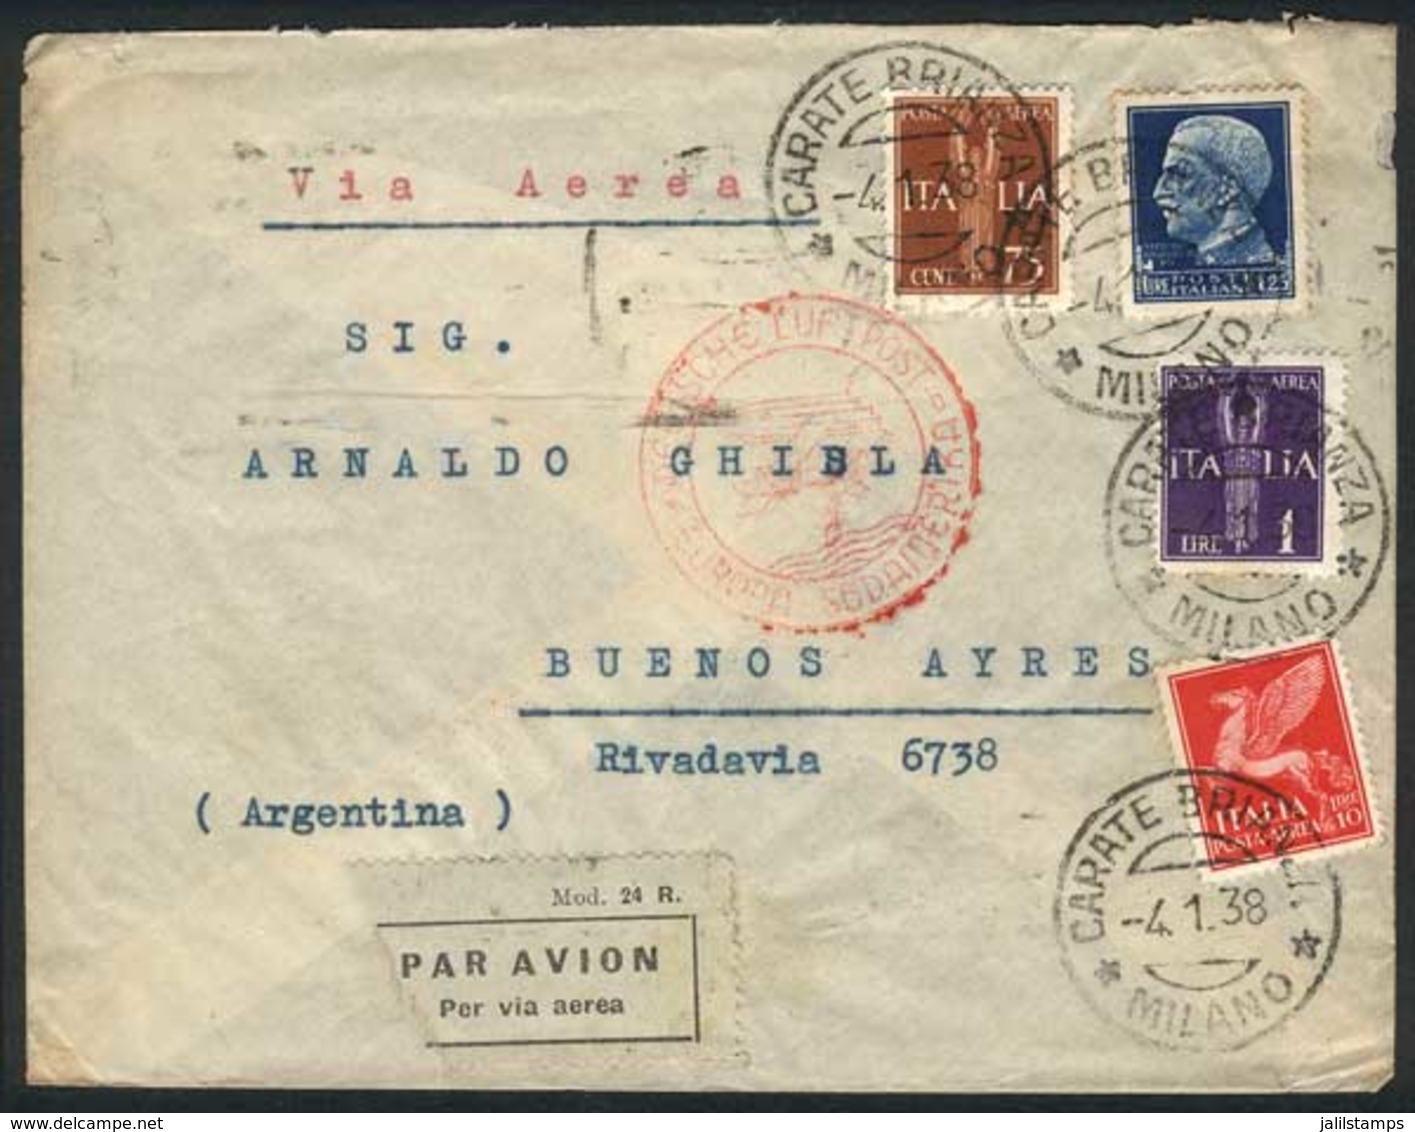 ITALY: Airmail Cover Sent From Carate Brianza To Buenos Aires On 4/JA/1938, Franked With Interesting 13 Lire Postage, Ve - Non Classés